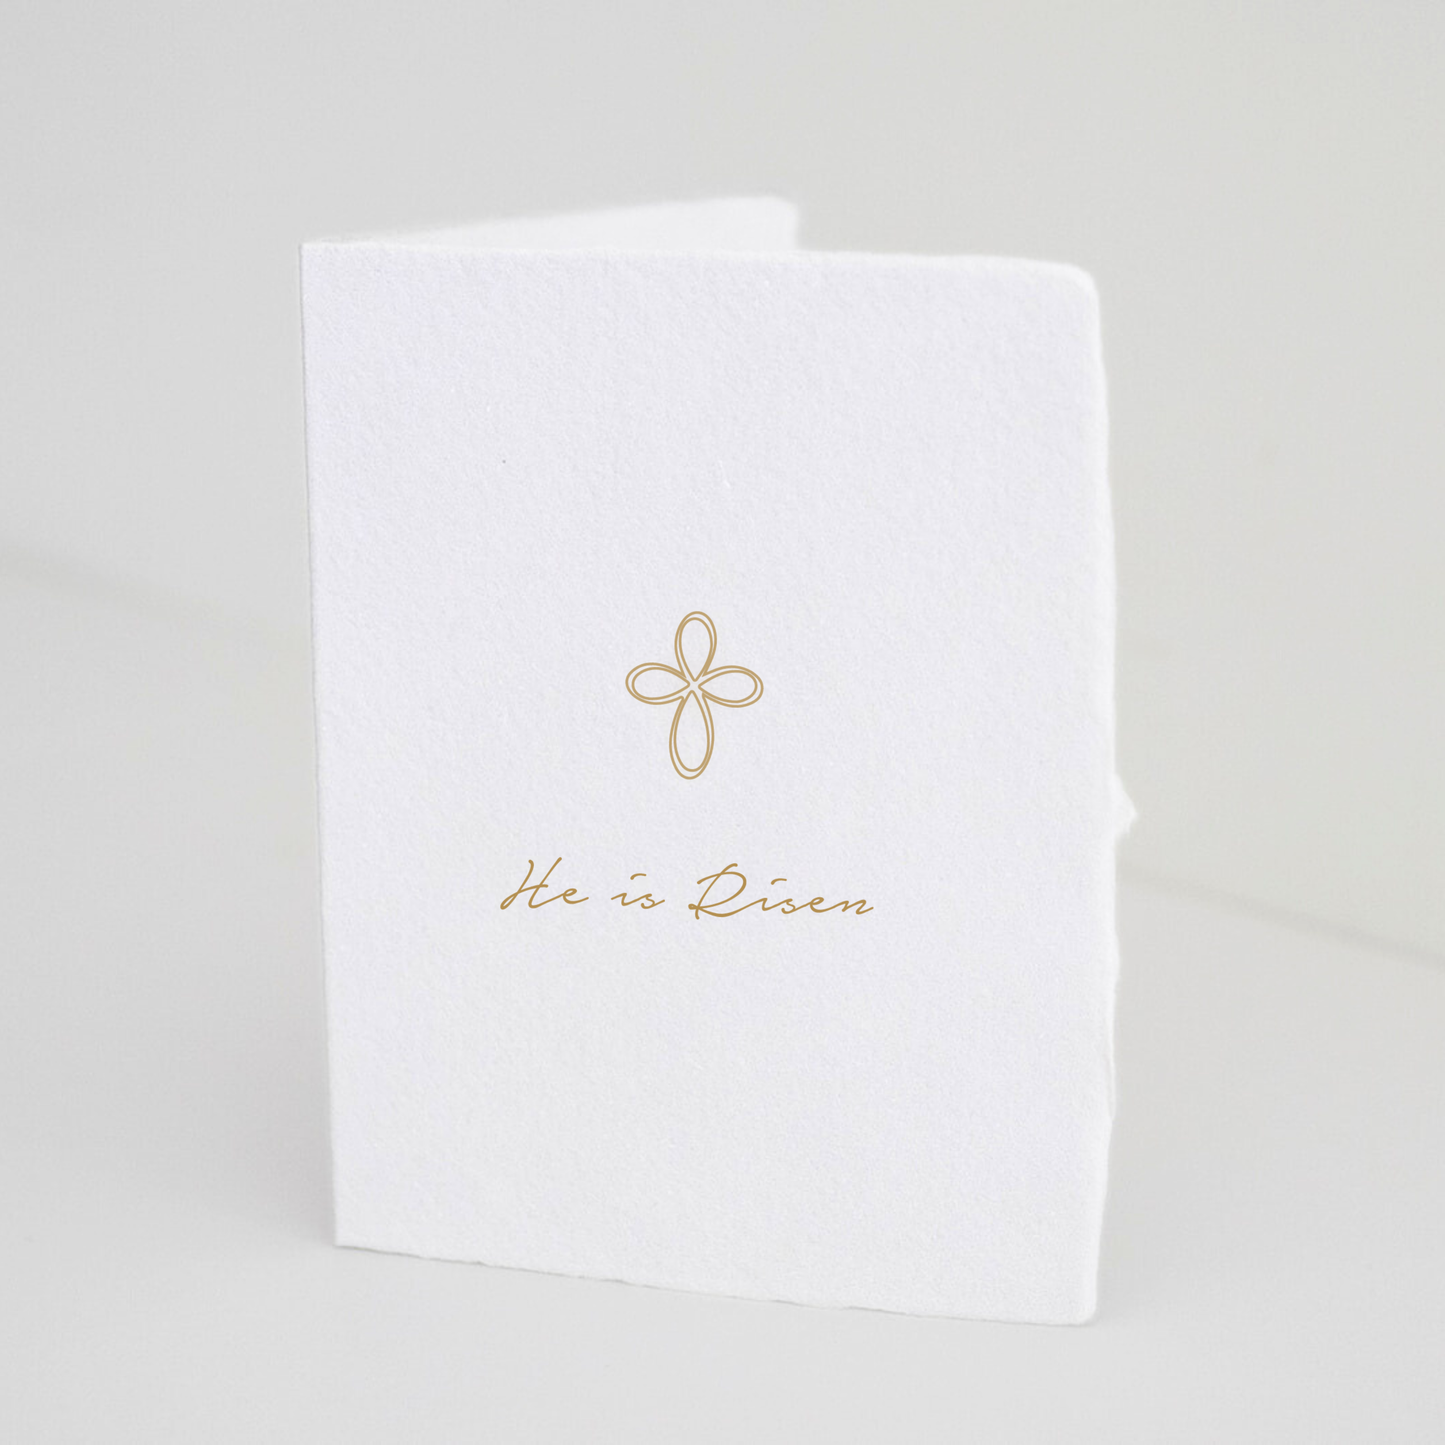 Paper Baristas - "He is Risen" Easter Greeting Card